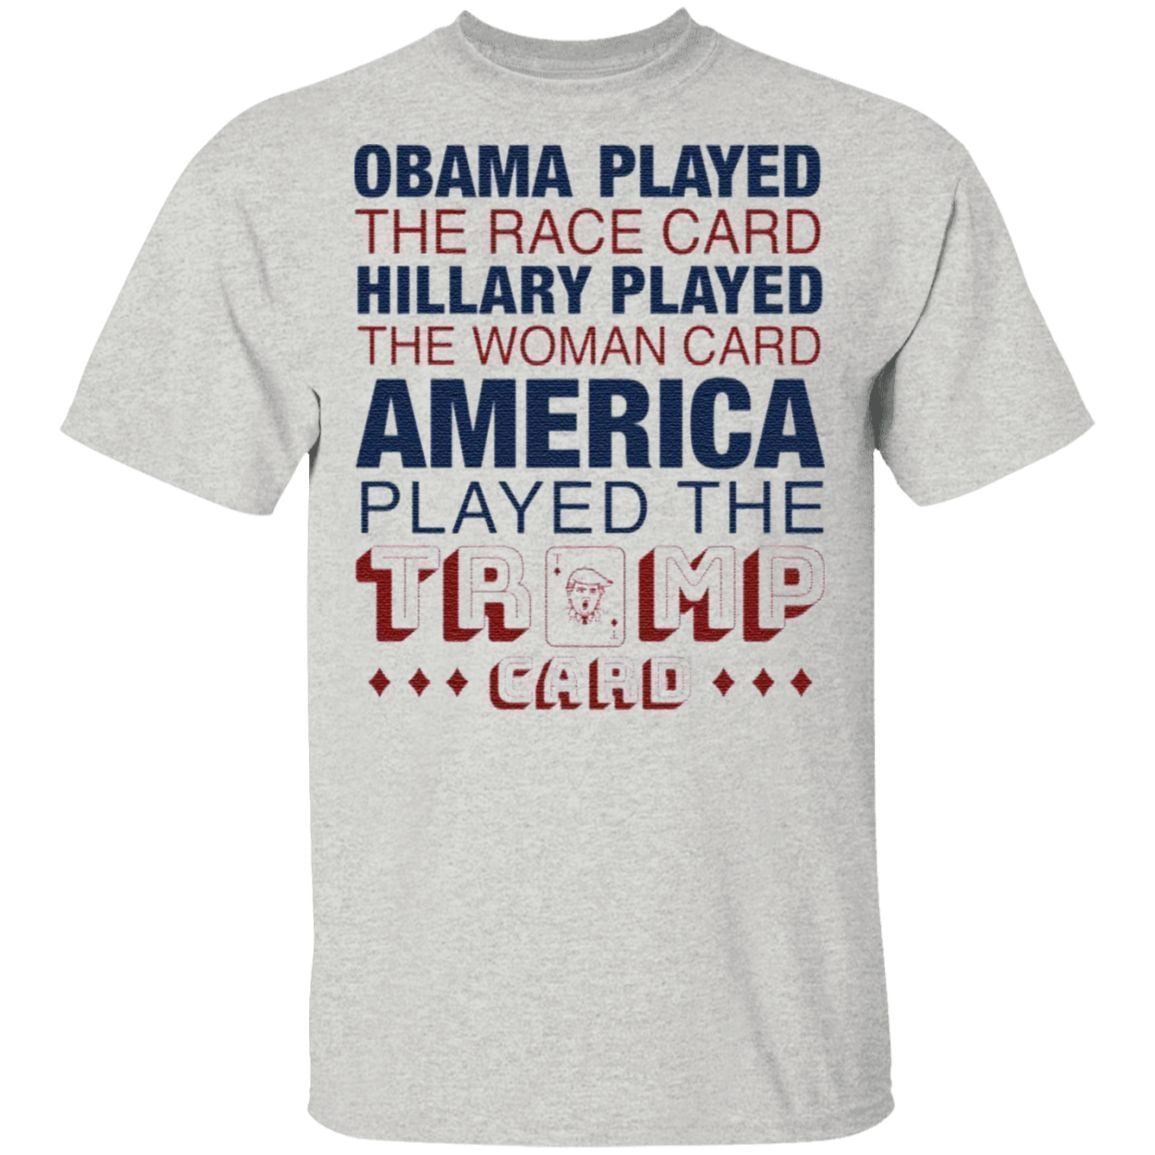 Obama played the race card Hillary played the woman card America played the Trump card shirt